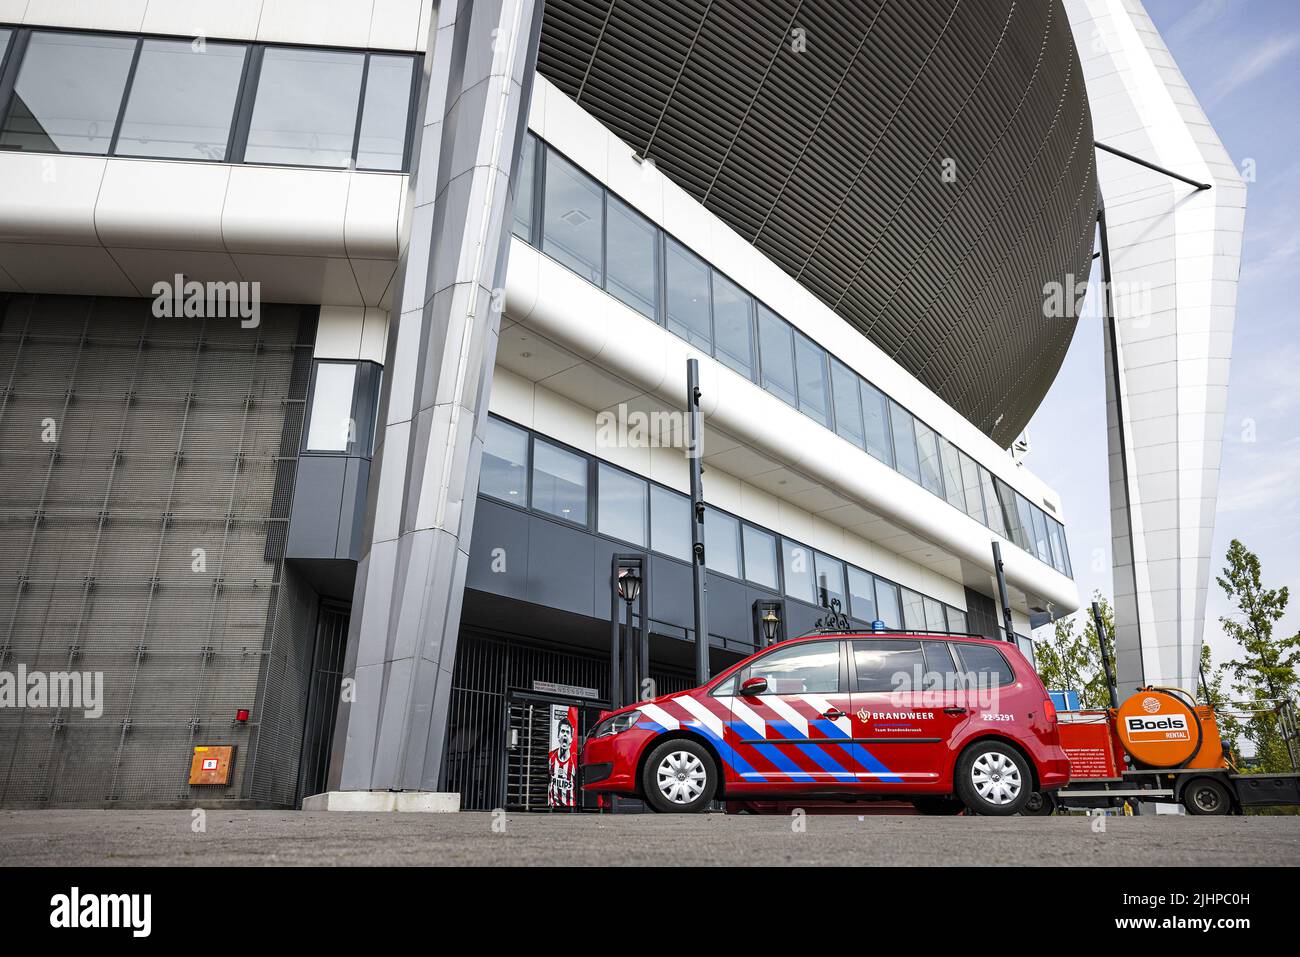 EINDHOVEN, Netherlands, 2022-07-20 10:40:30 EINDHOVEN - A fire brigade car in front of the Philips Stadium, the home of the Eindhoven football club PSV. Part of the roof was damaged by a fire. ANP ROB ENGELAAR netherlands out - belgium out Stock Photo